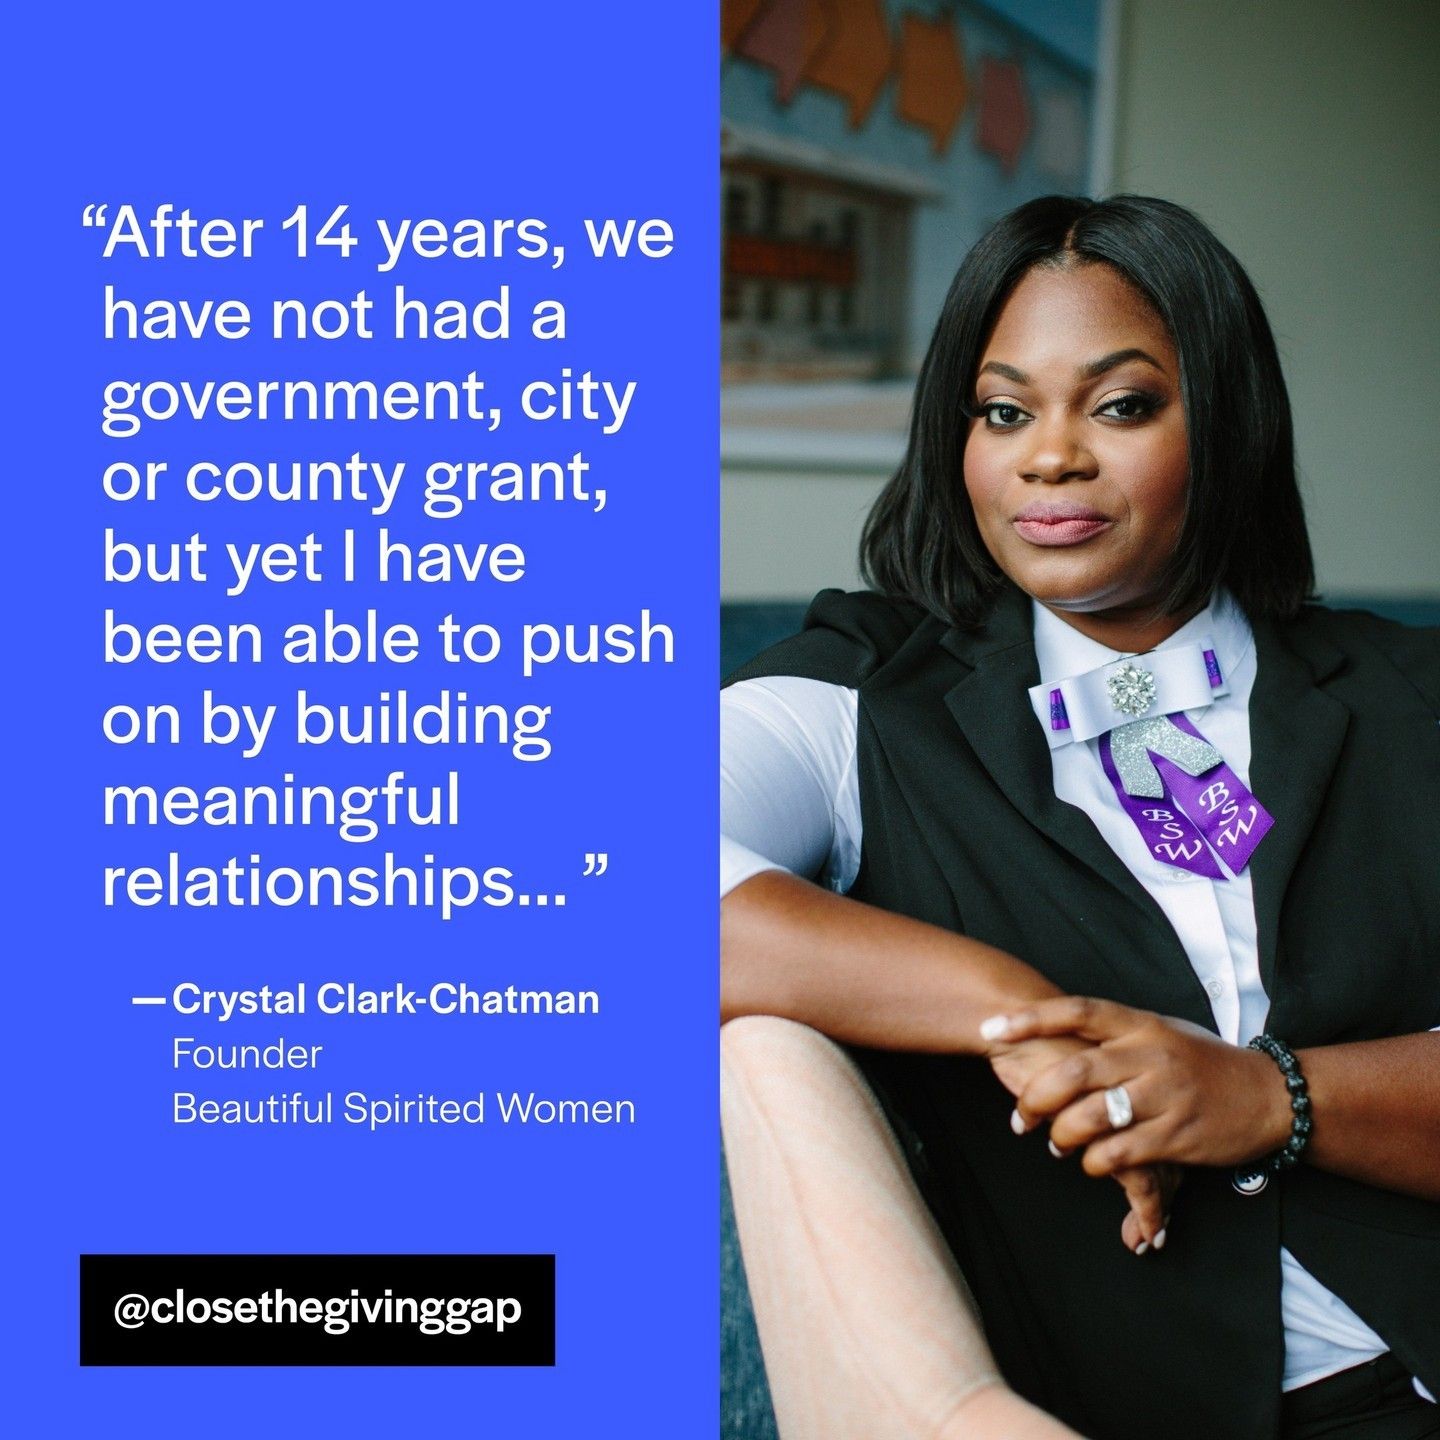 &ldquo;After 14 years, we have not had a government, city or county, grant, but yet I have been able to push on by building meaningful relationships,&rdquo; says Crystal Clark-Chatman, Founder of Beautiful Spirited Women